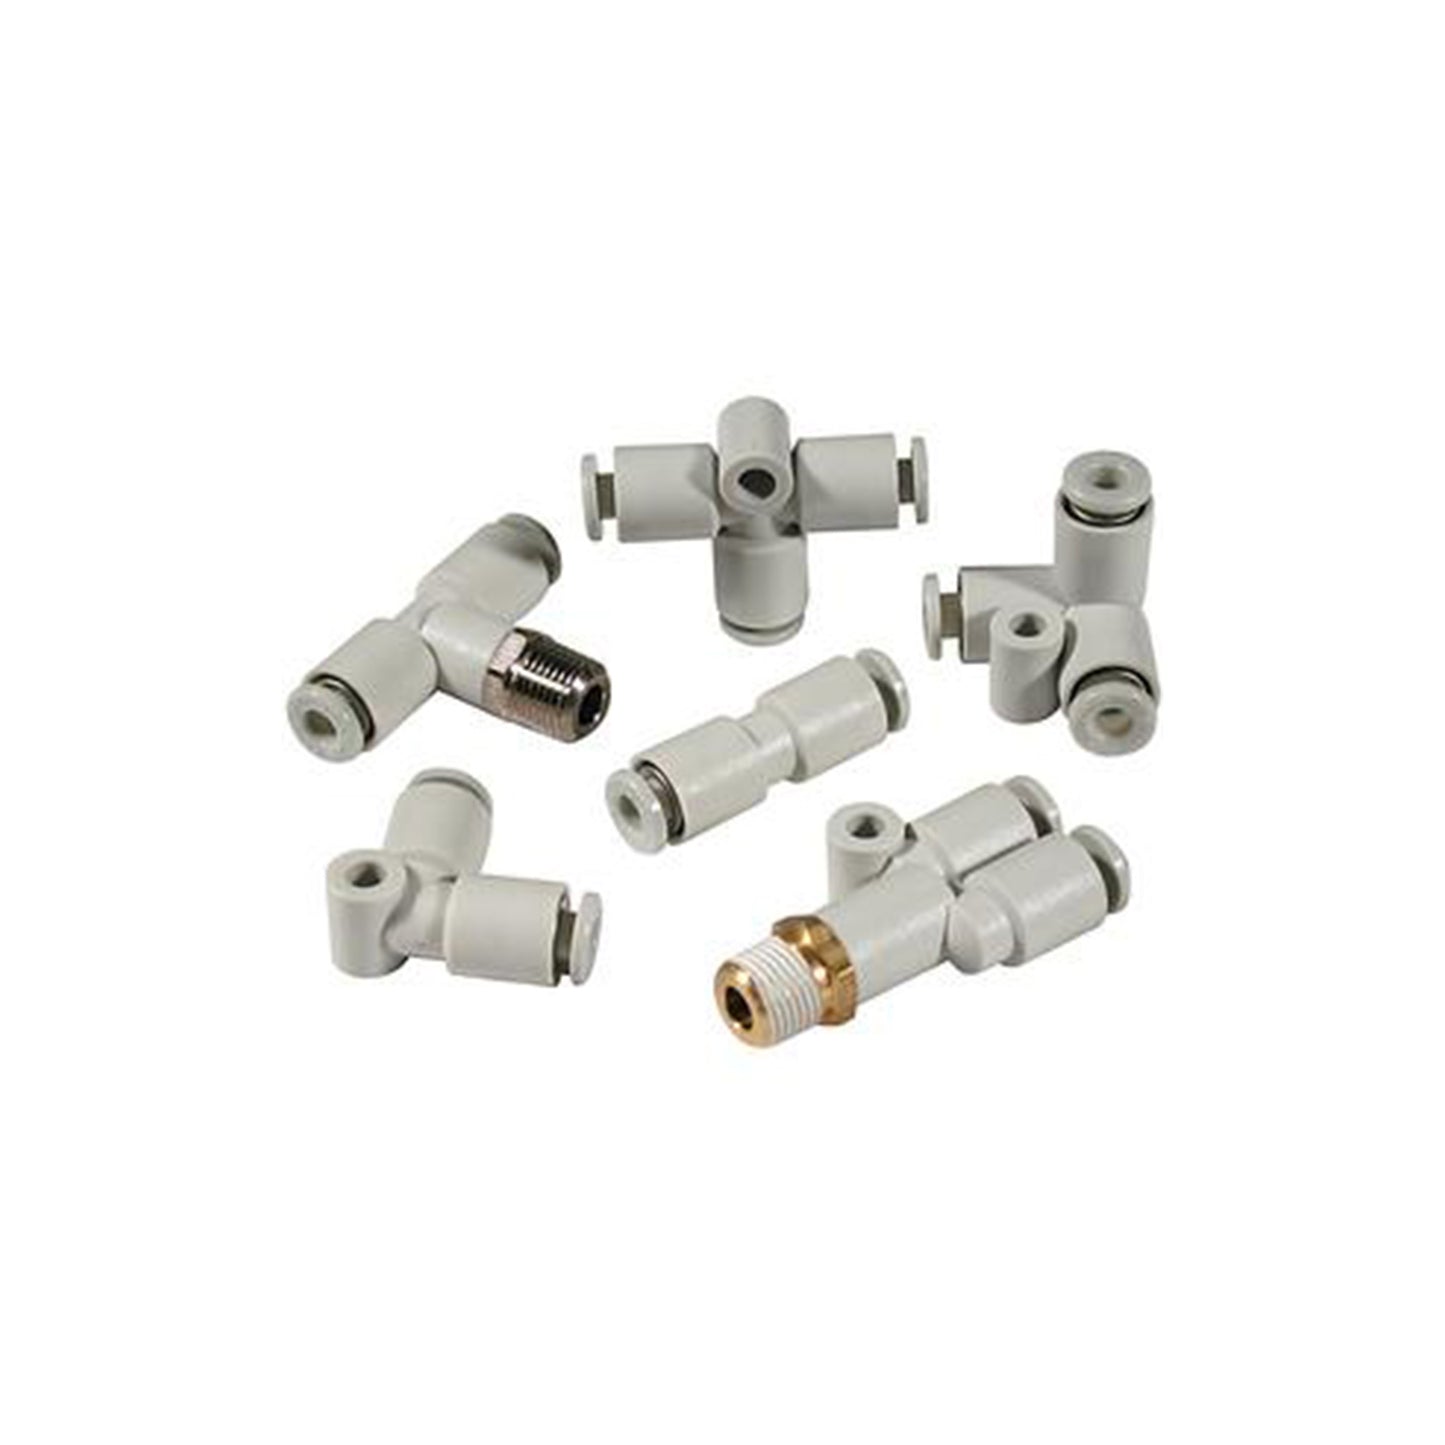 SMC KQ2H05-U01 | Unifit Male Connector Fitting